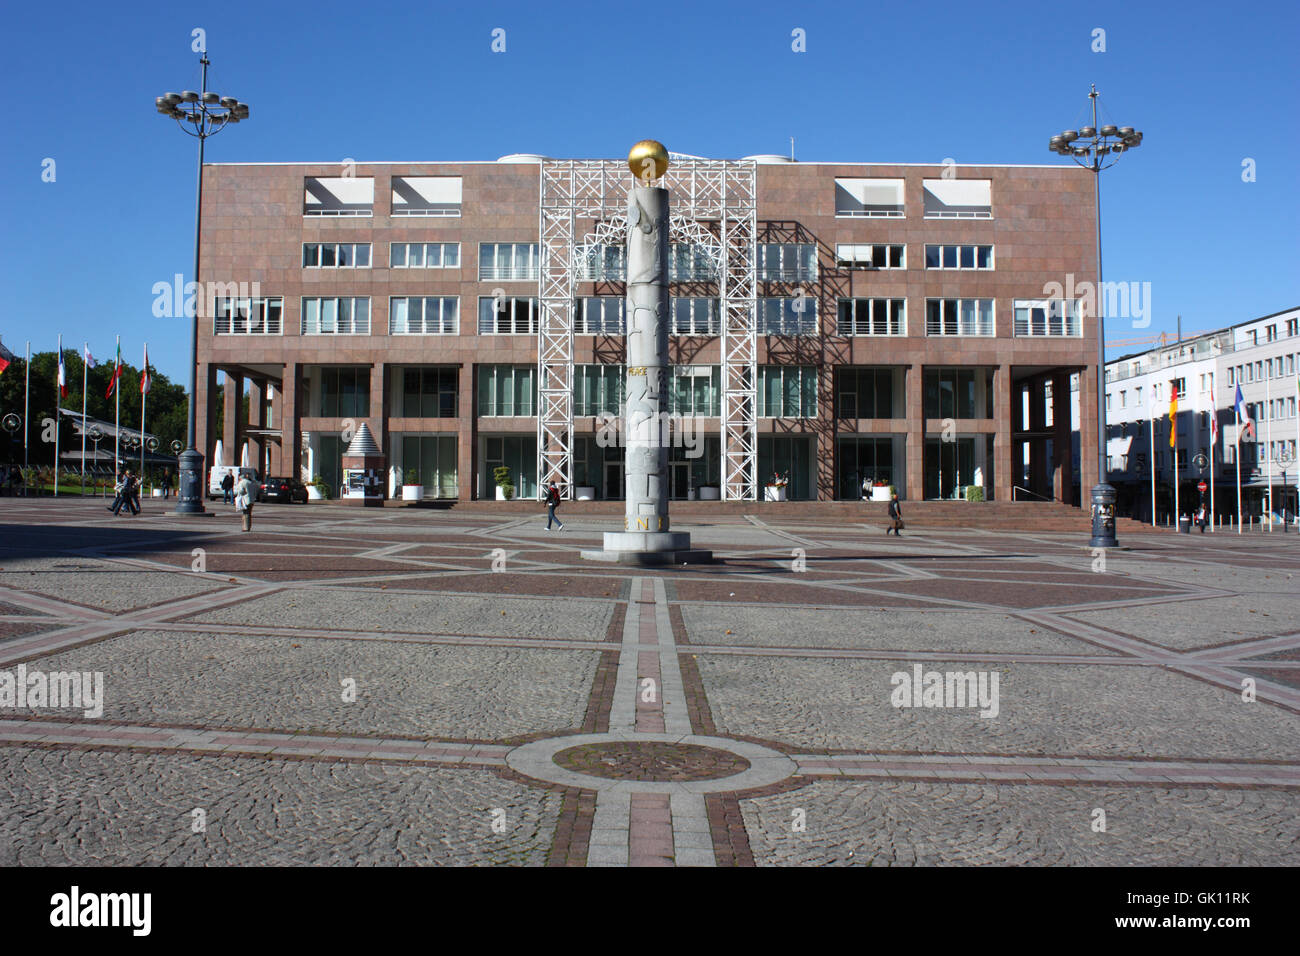 Dortmund City Centre High Resolution Stock Photography and Images - Alamy